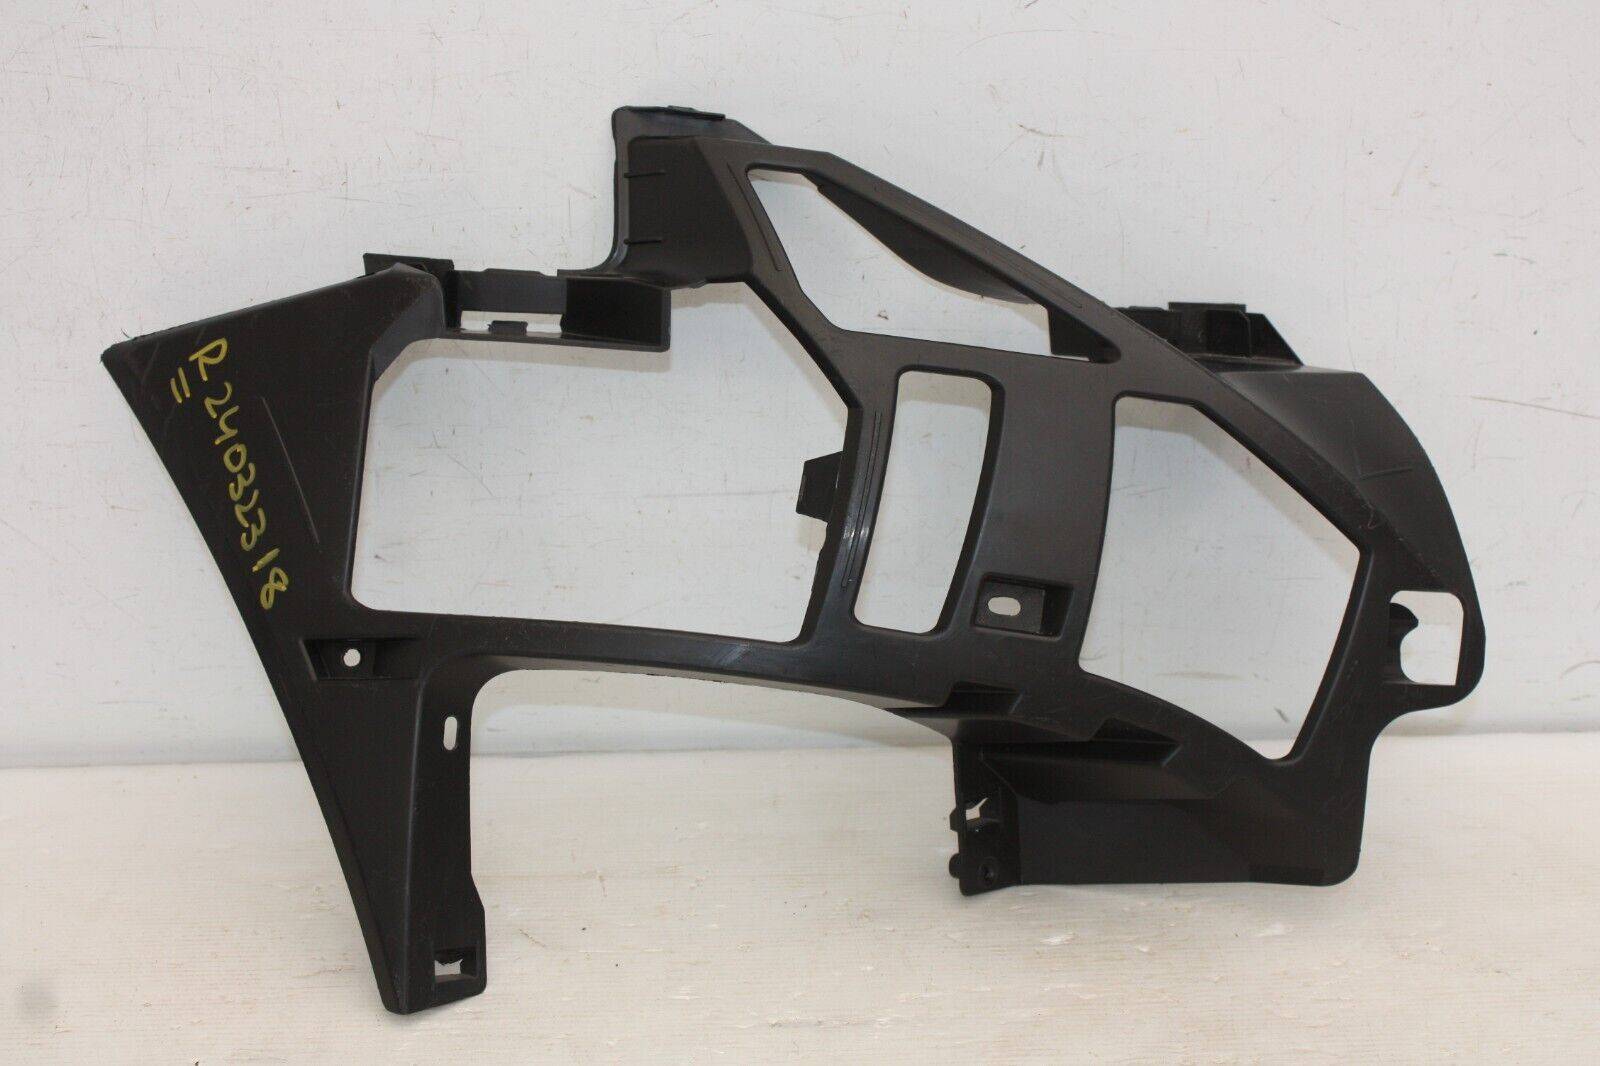 Peugeot-5008-Front-Bumper-Right-Bracket-2017-TO-2021-9815337580-Genuine-175666046694